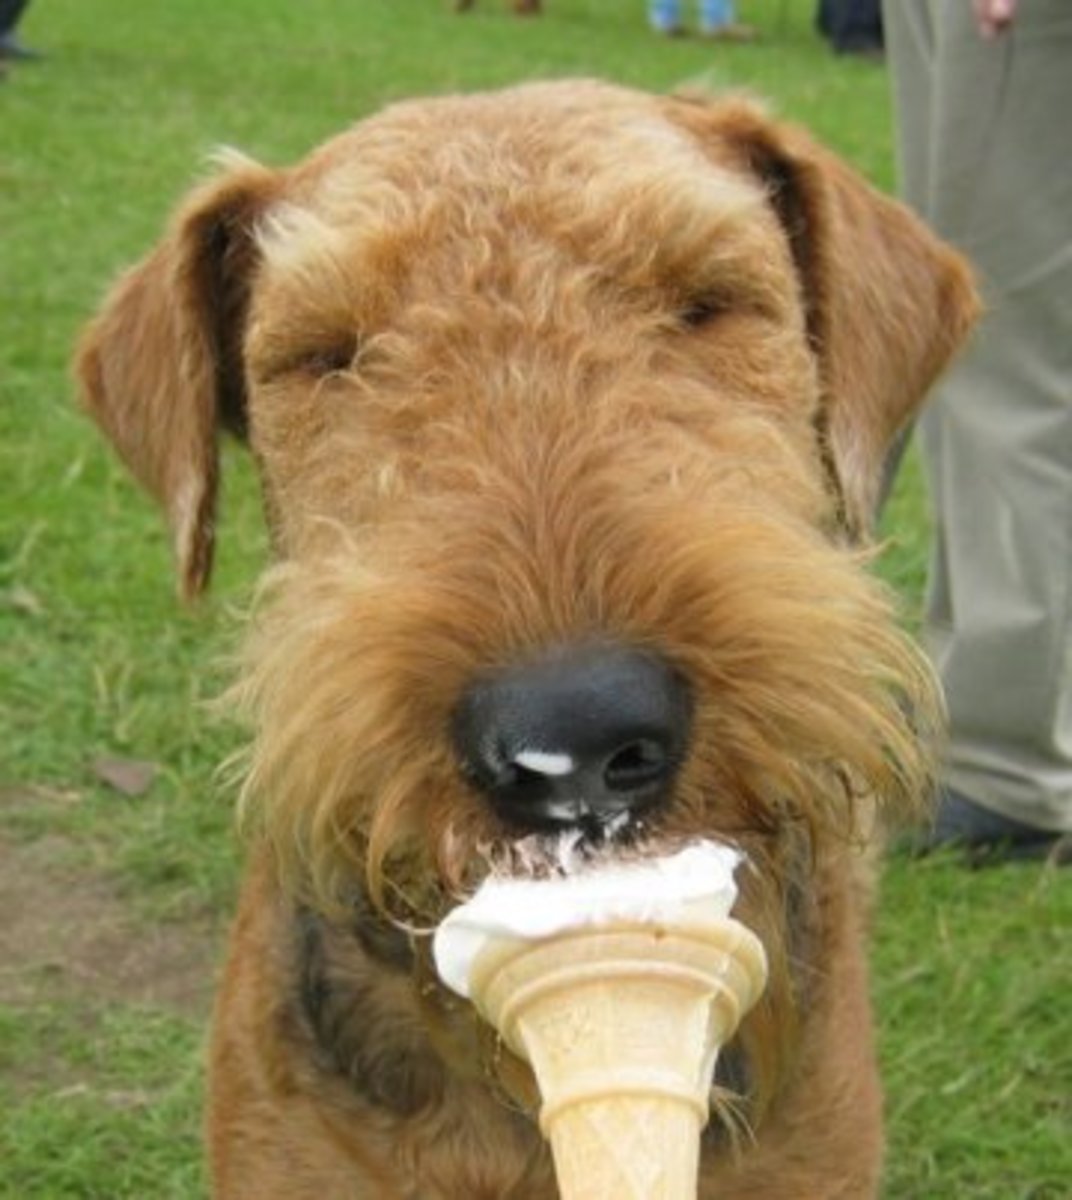 Adorable Airdale dog eating an ice cream cone